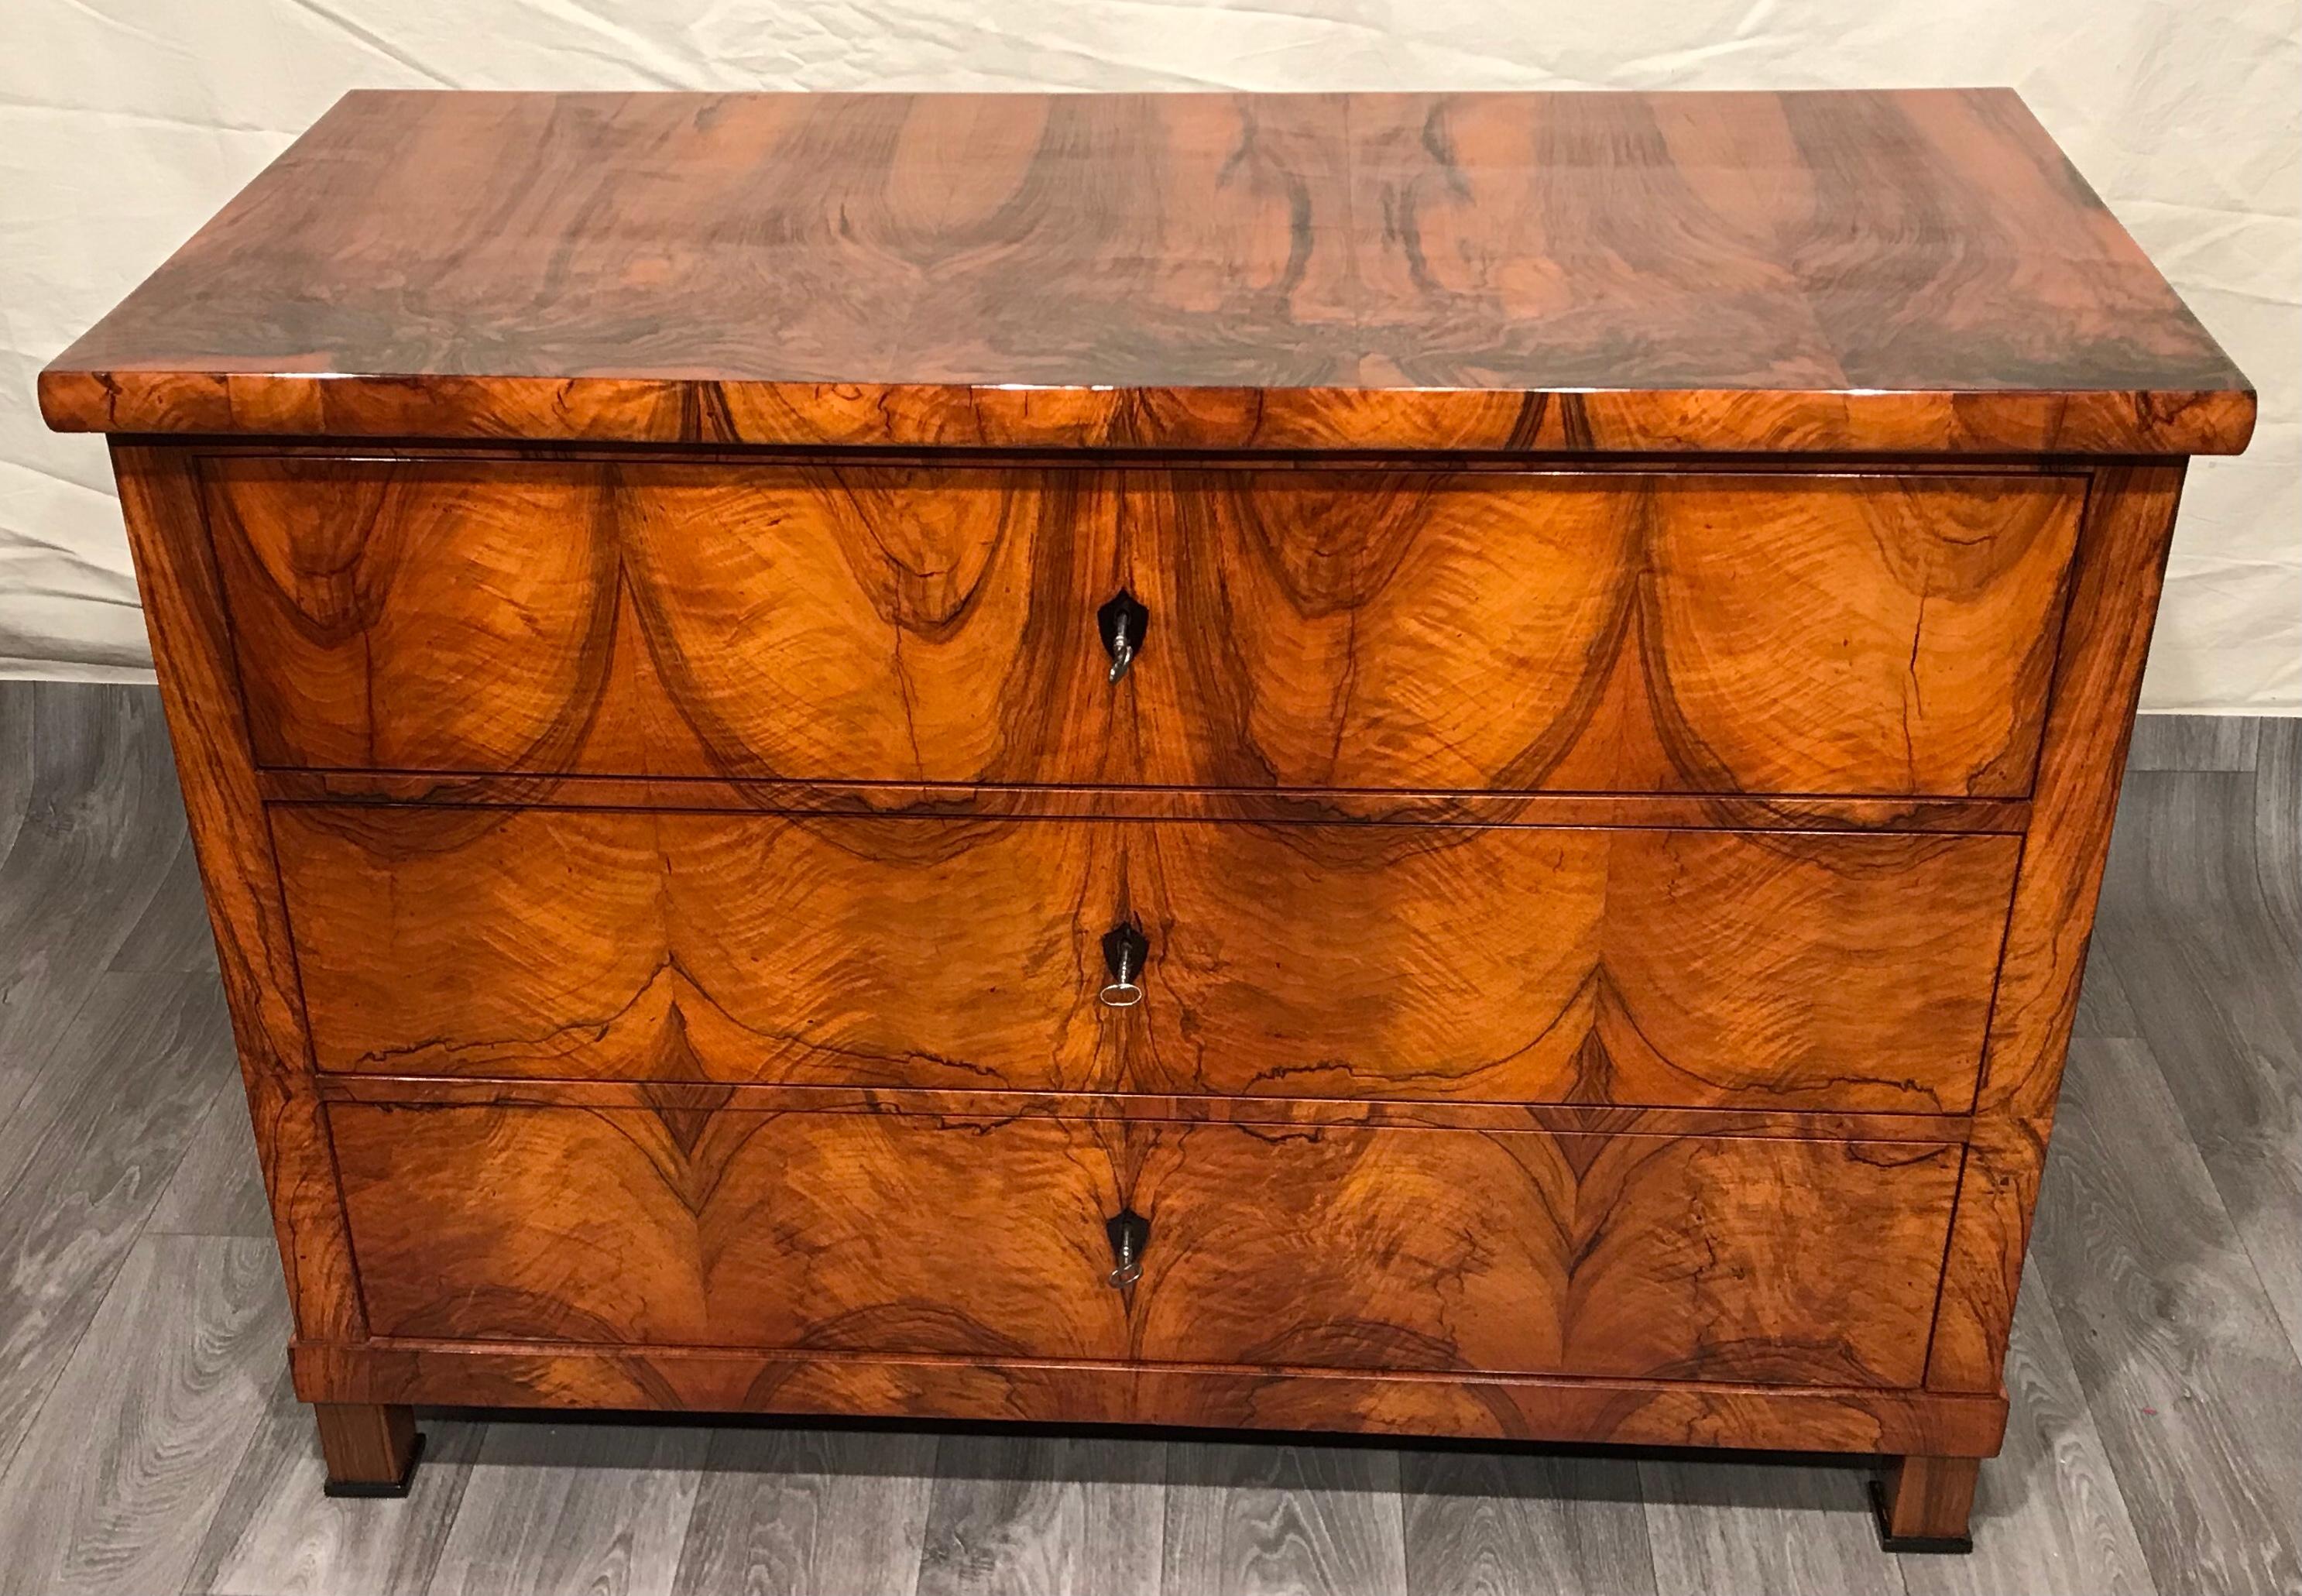 Biedermeier chest of drawers, South German, 1820.
Unpretentious design and a gorgeous walnut veneer are the special features of this Biedermeier chest.
The three-drawer commode comes refinished and French polished. 